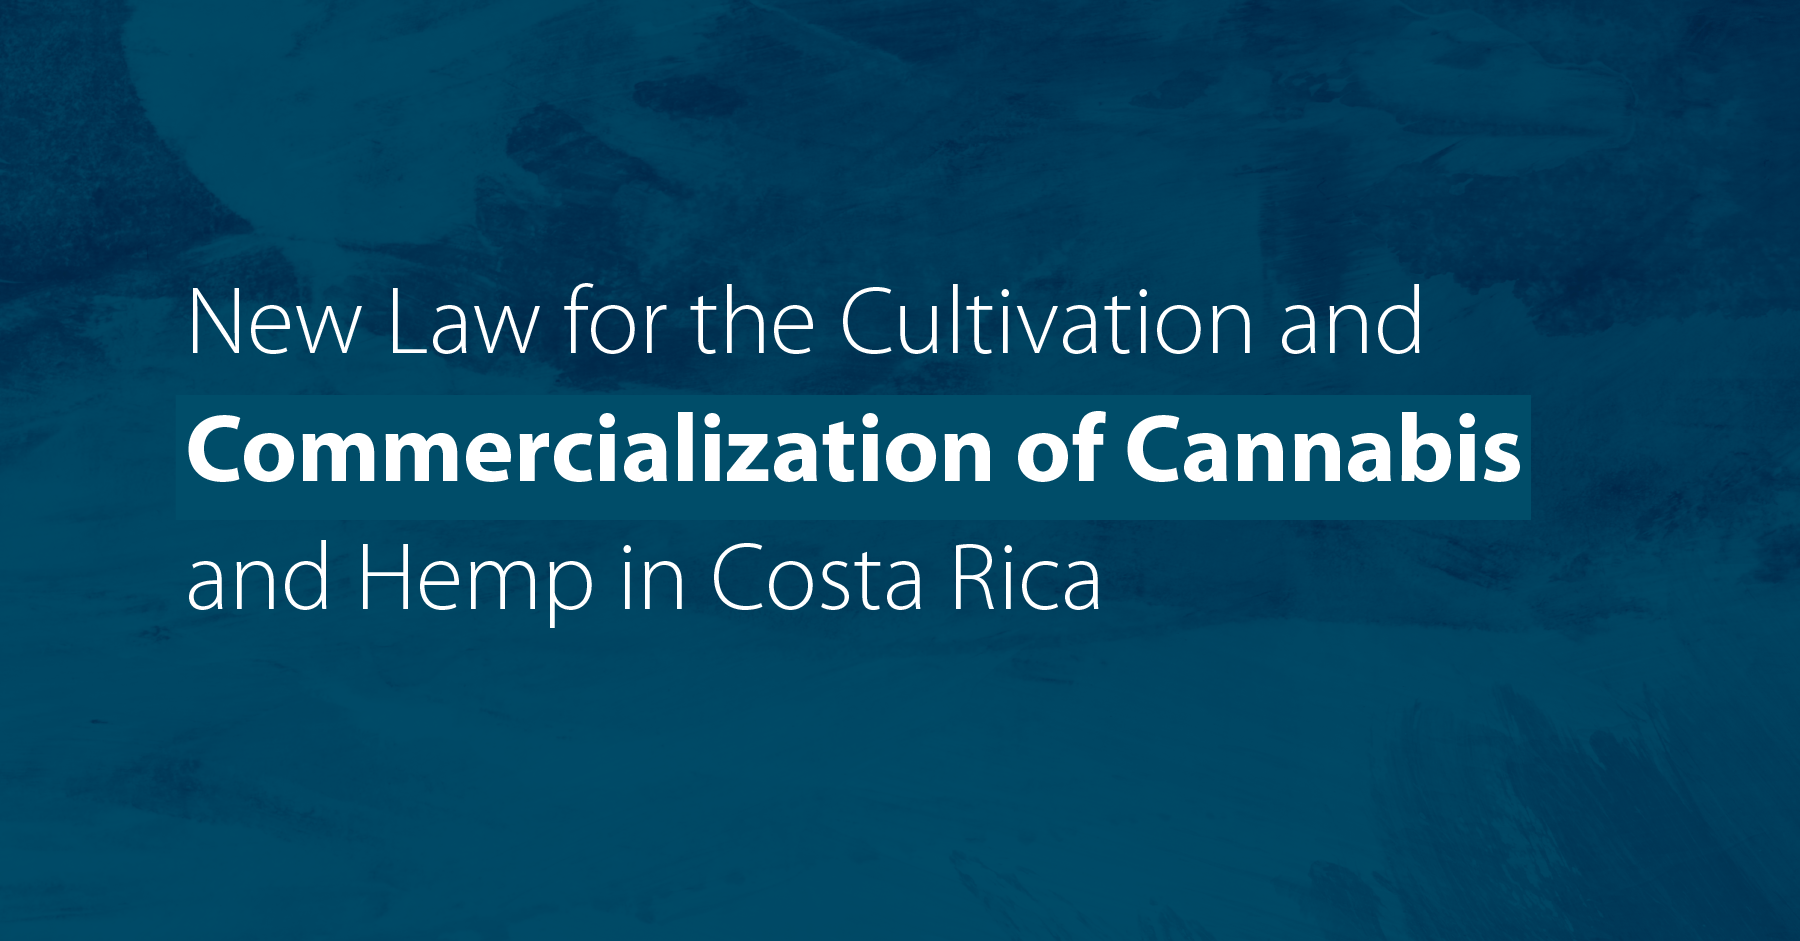 New Law for the Cultivation and Commercialization of Cannabis and Hemp in Costa Rica